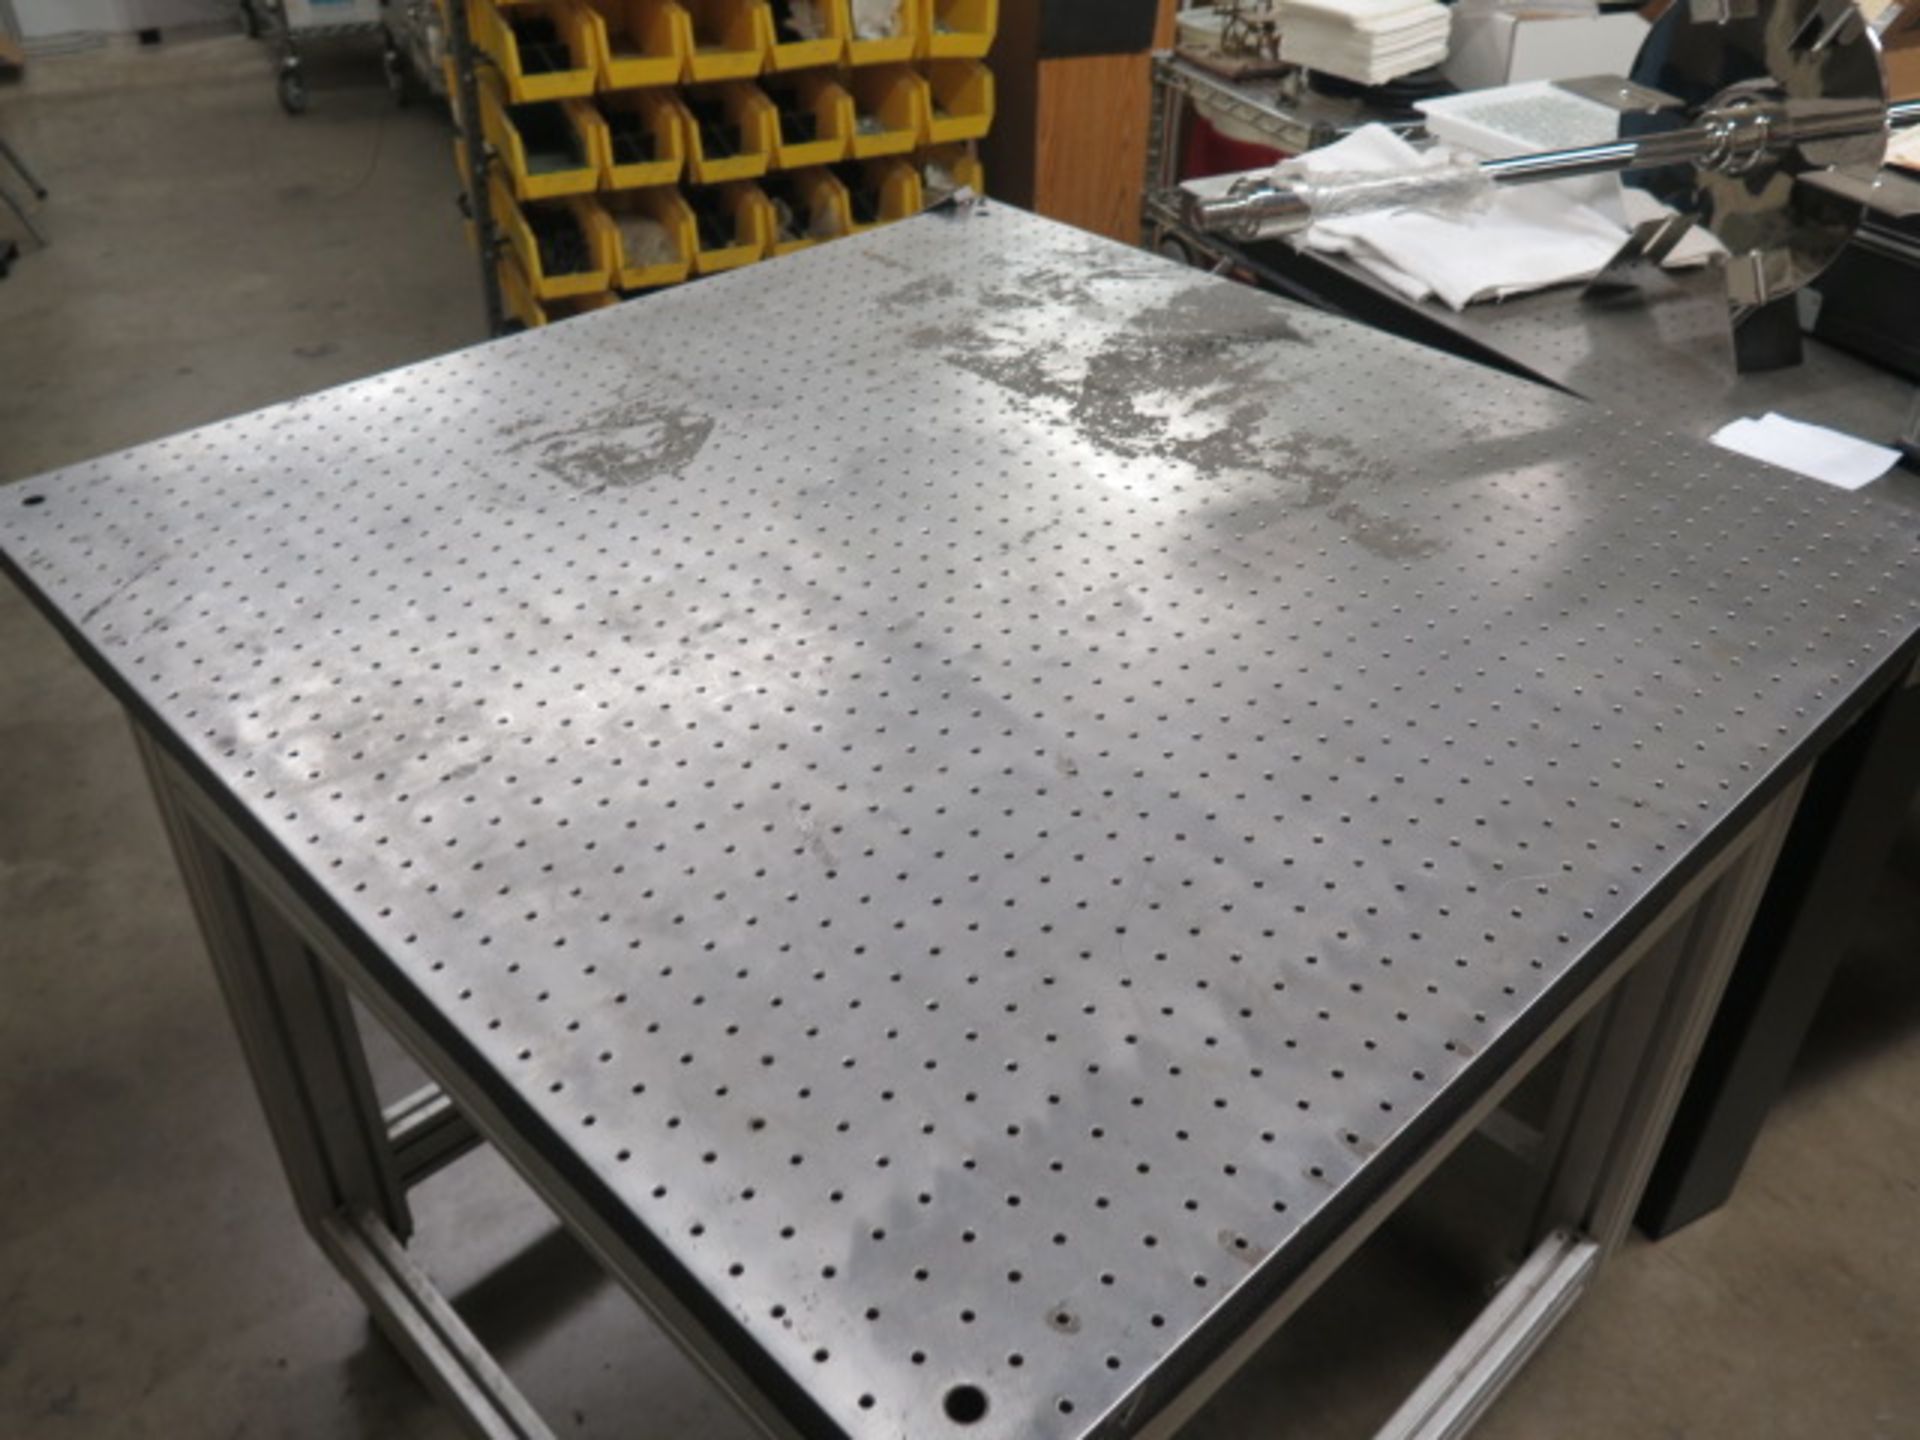 TMC 39” x 39” Honeycomb Technical Lab Test Table w/ Wheels (SOLD AS-IS - NO WARRANTY) - Image 4 of 8